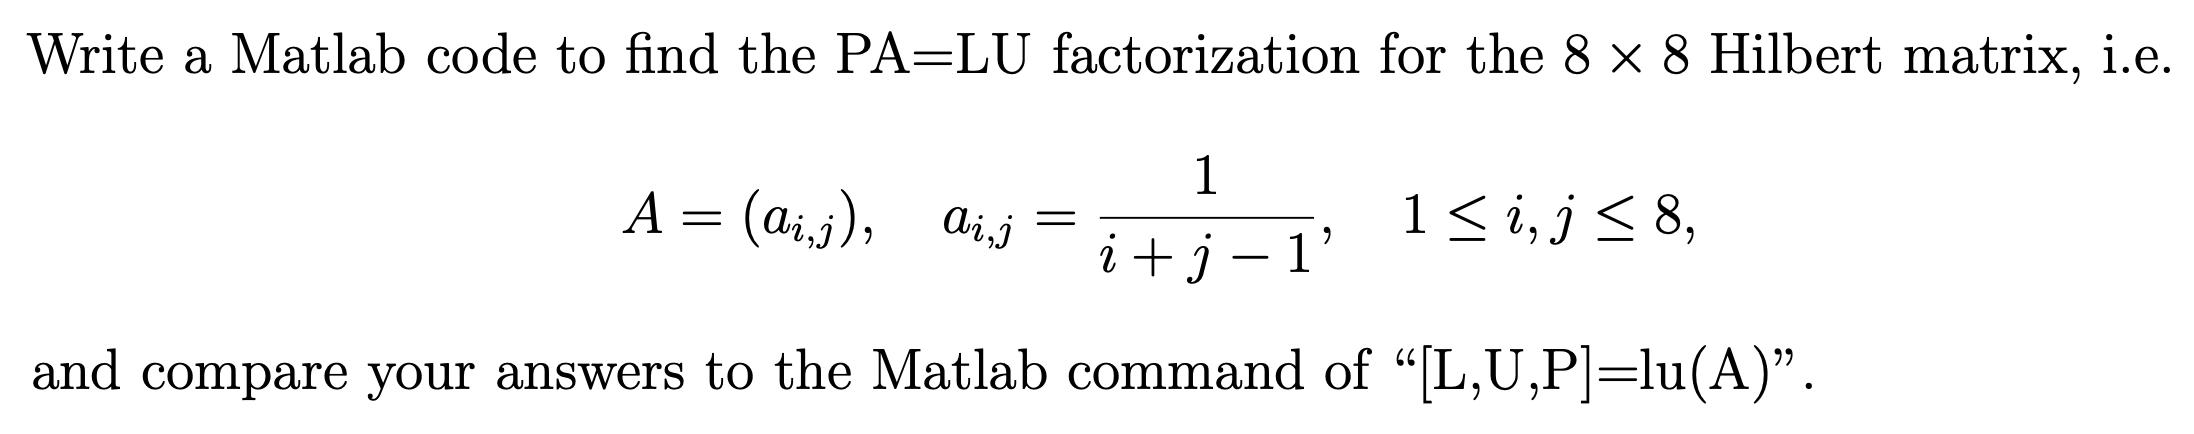 Write a Matlab code to find the PA=LU factorization for the 8 x 8 Hilbert matrix, i.e. 1 i + j-1' and compare